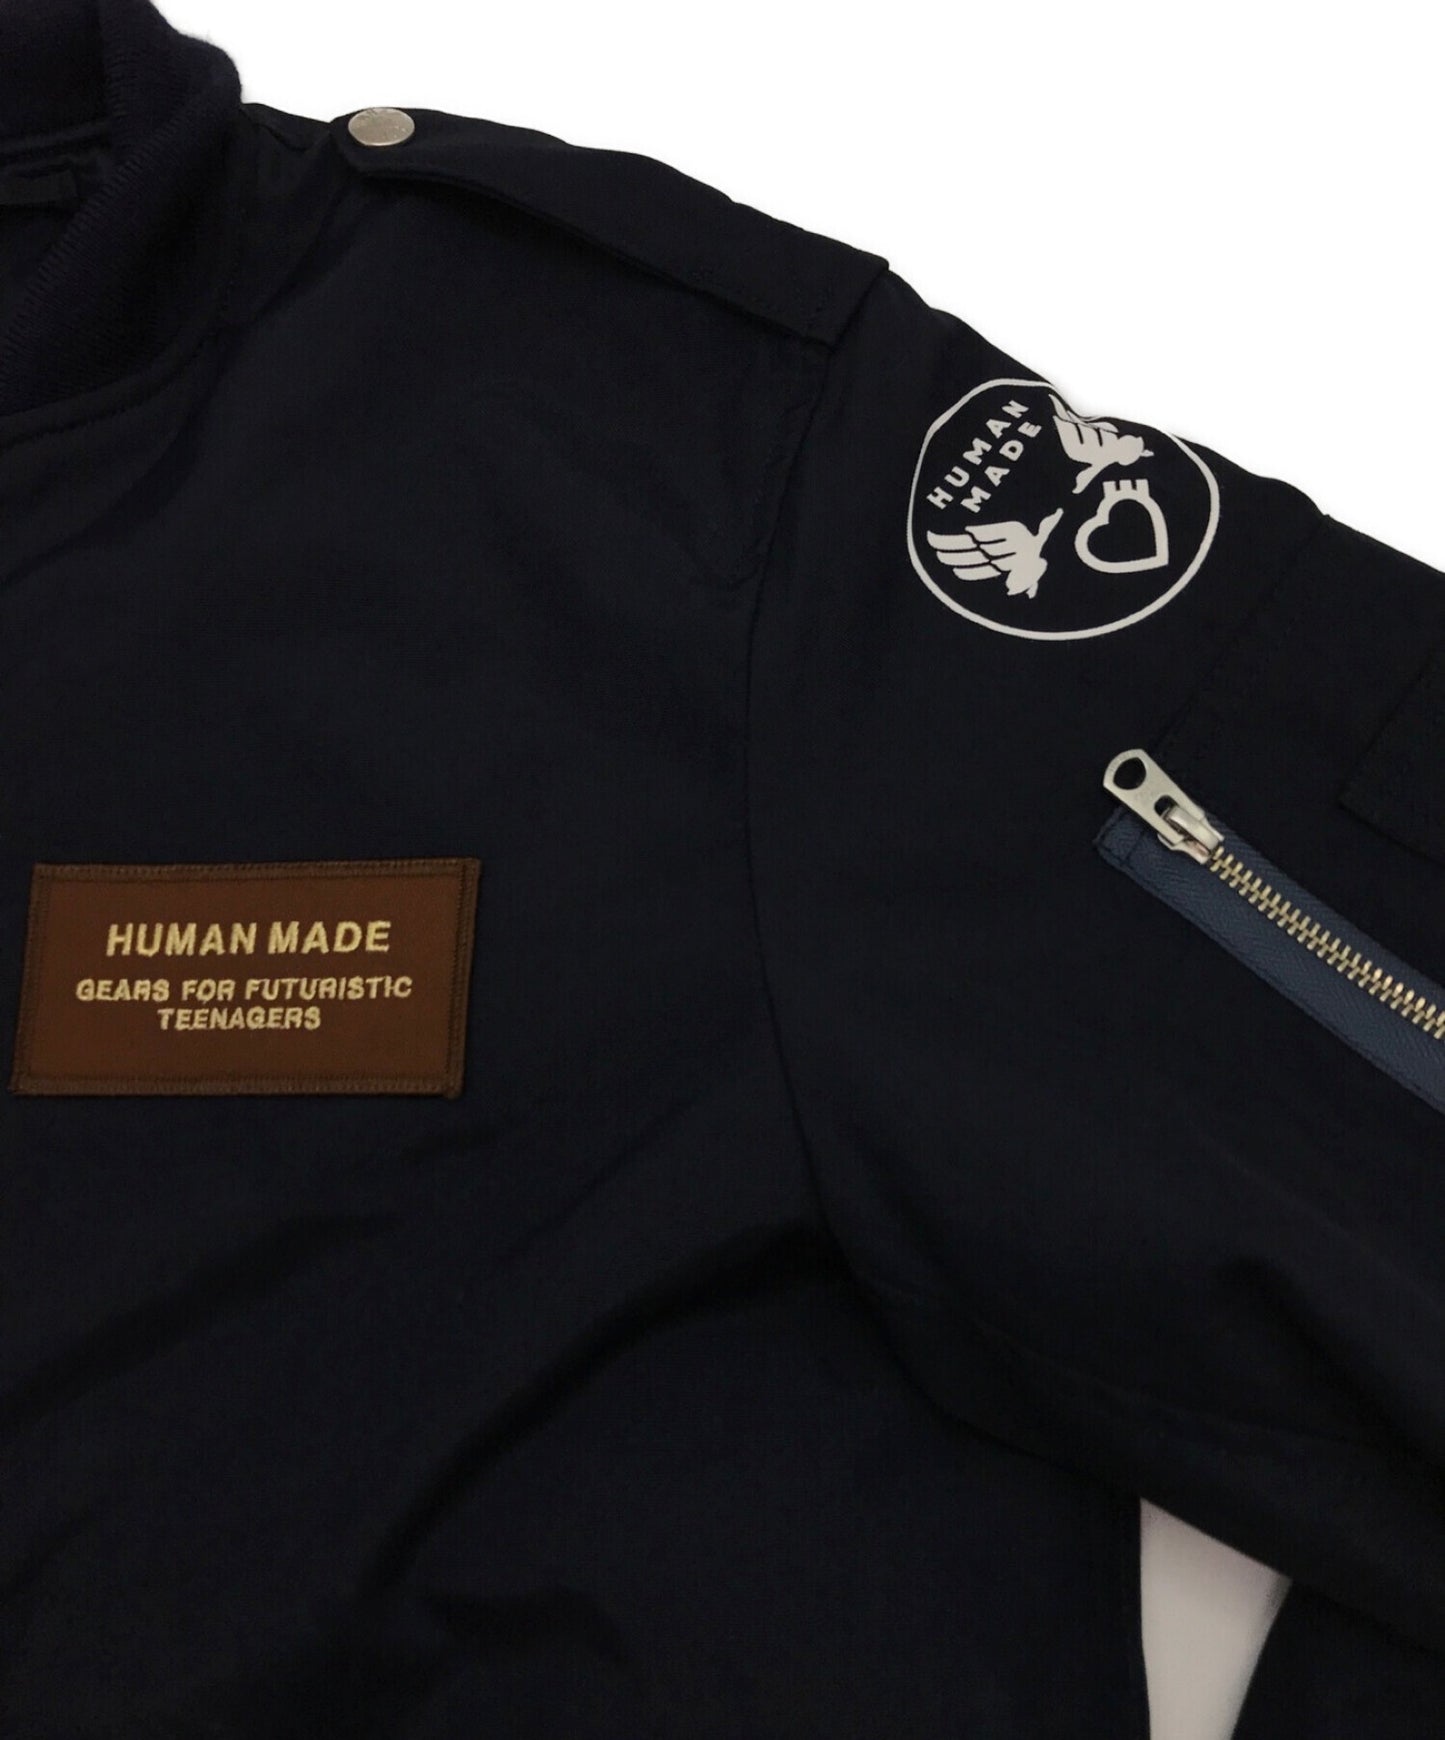 [Pre-owned] HUMAN MADE BOMBER JACKET